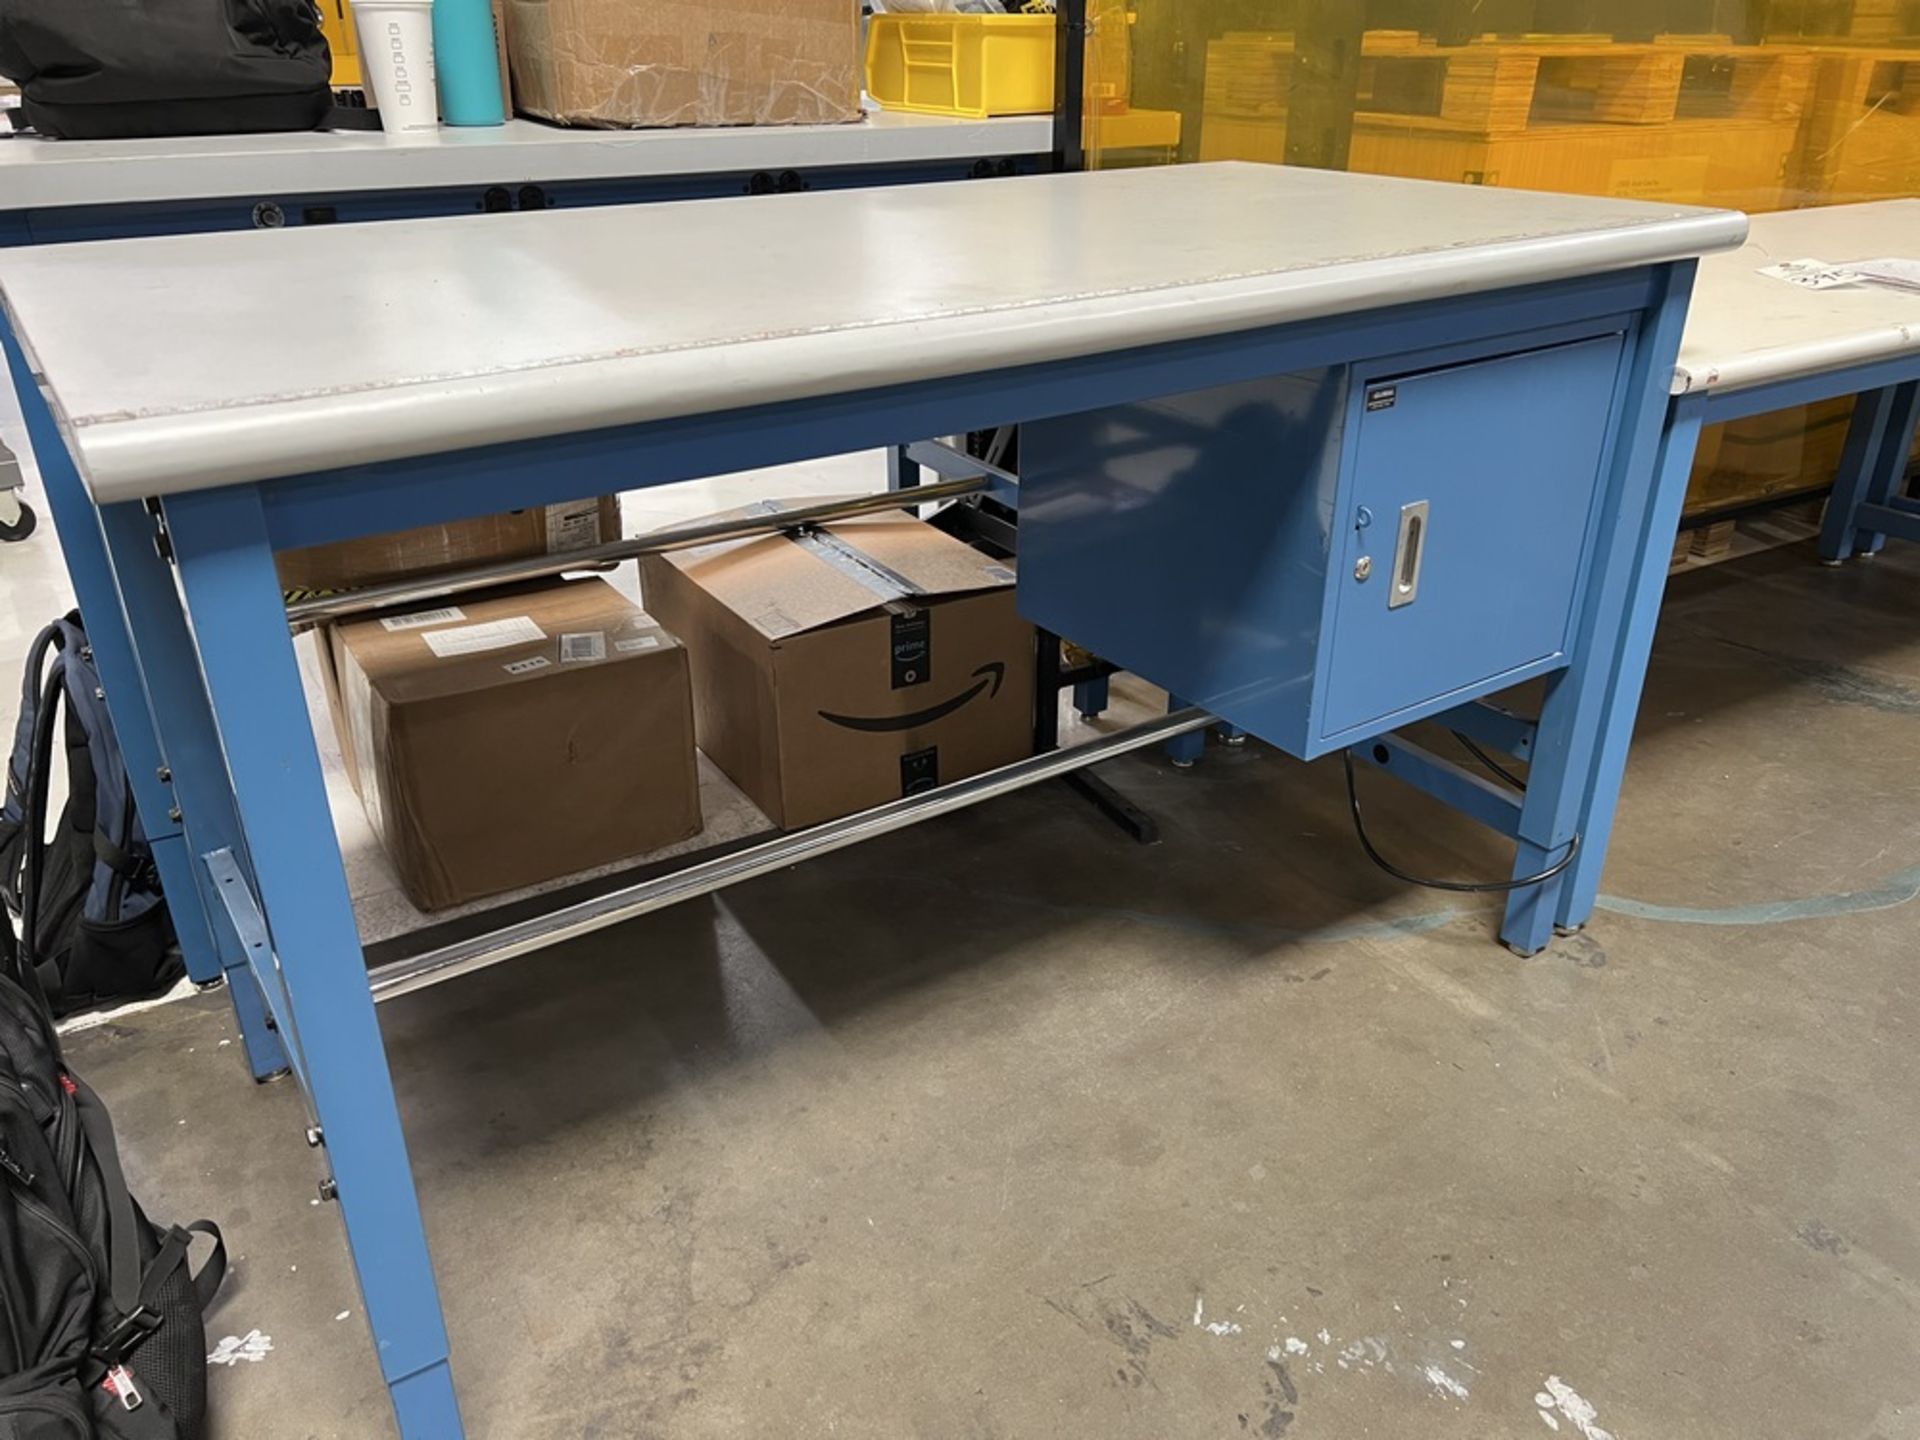 Global Industrial Adjustable Work Table With Cabinet & Power Strip 60" x 30" x 36"